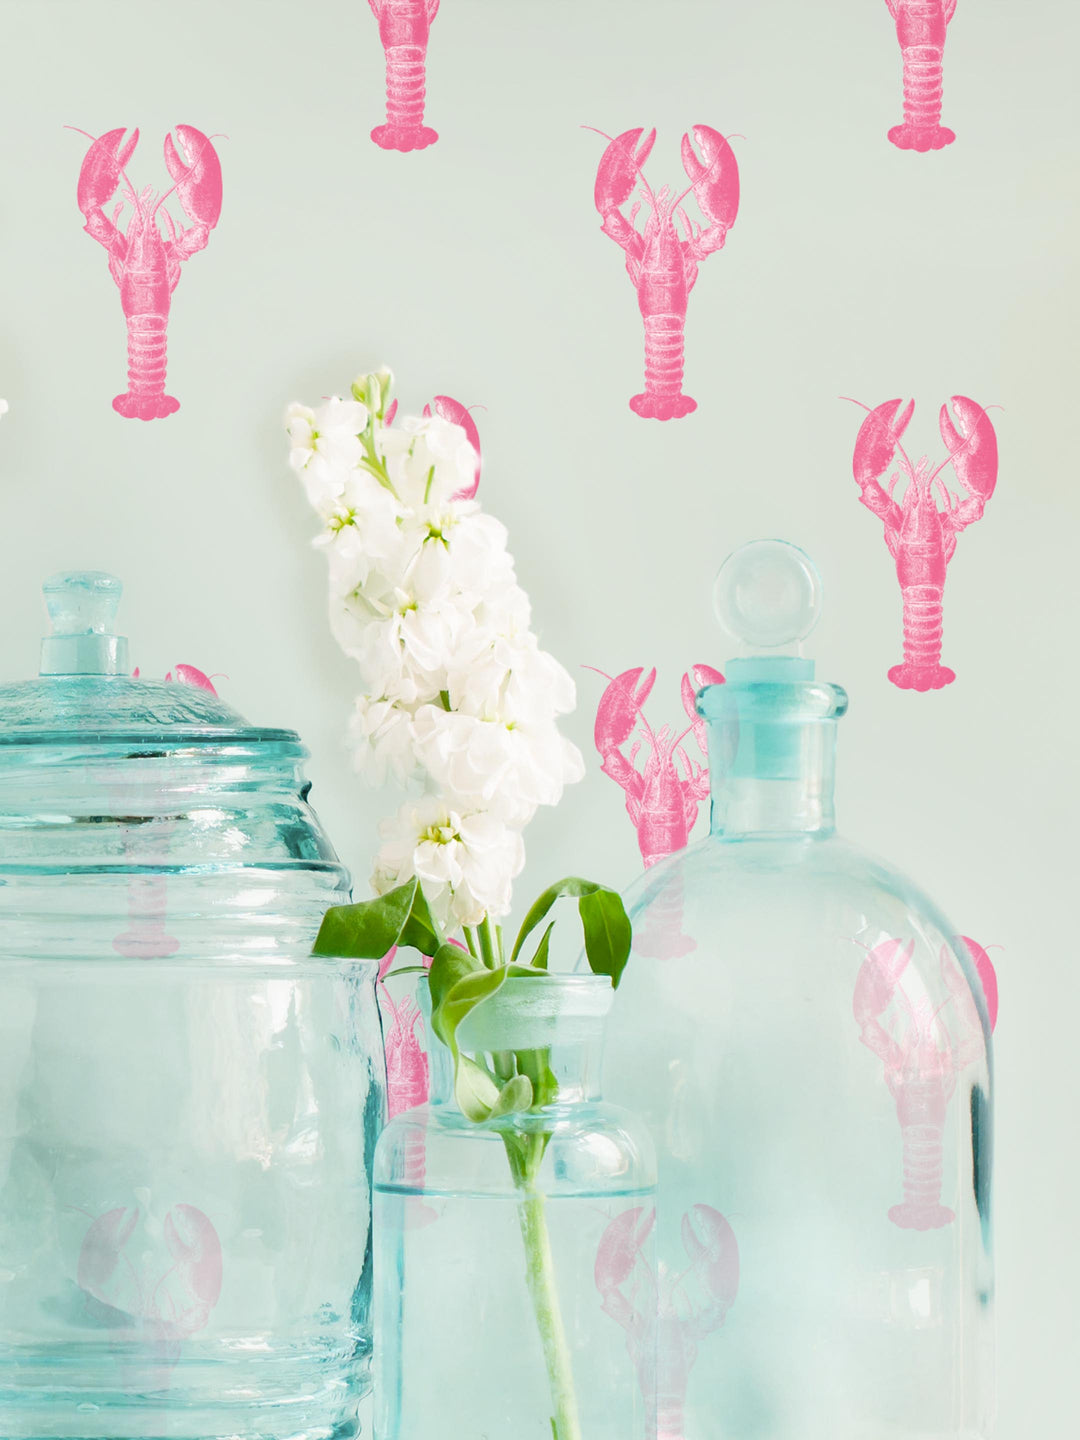 A bright pink lobster wallpaper by Milola Design